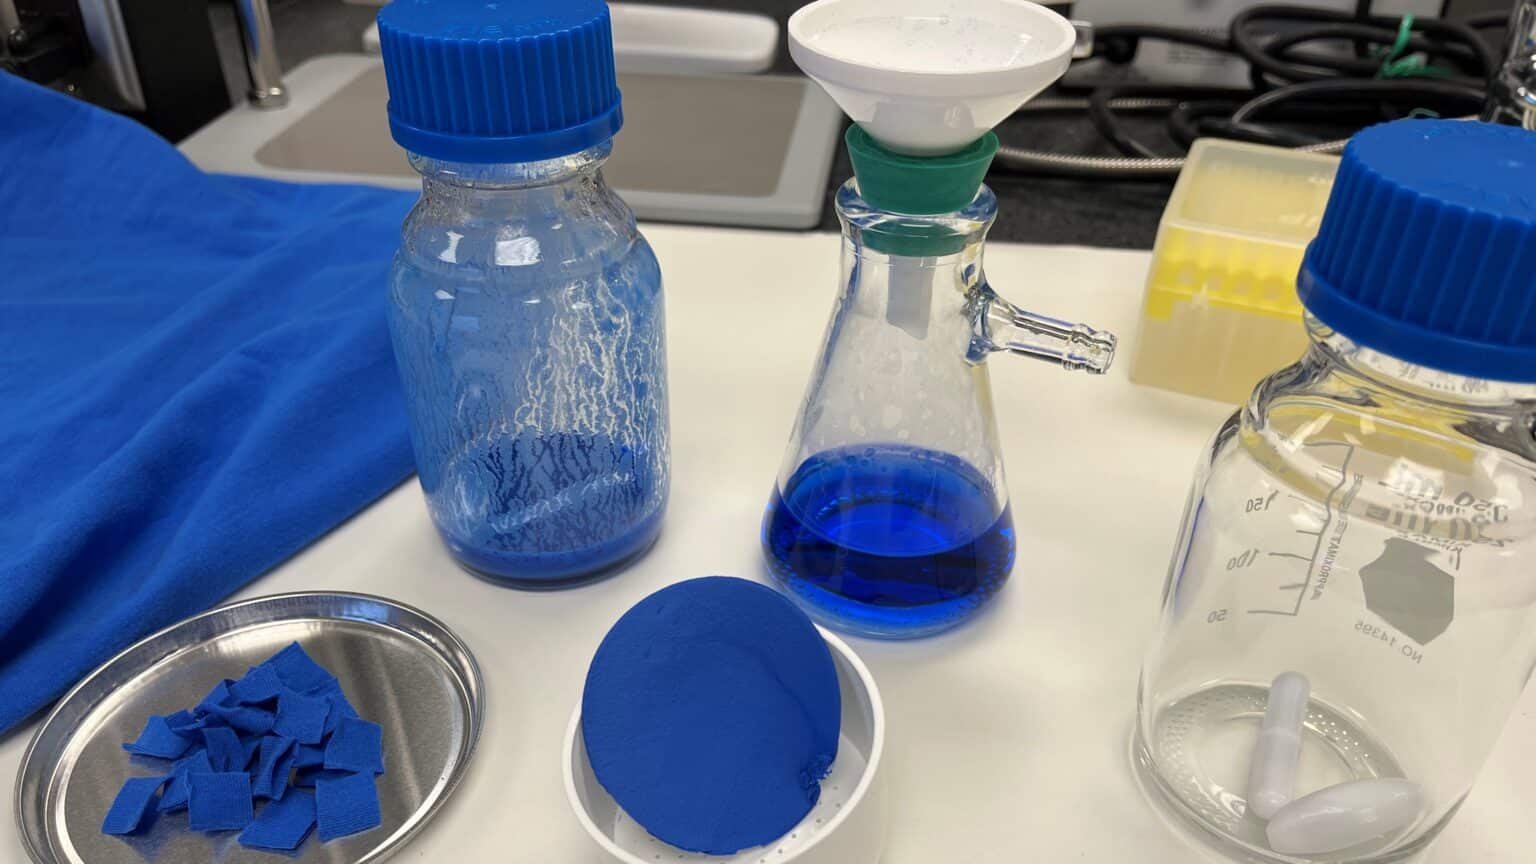 Separating blends with enzymes at NCSU